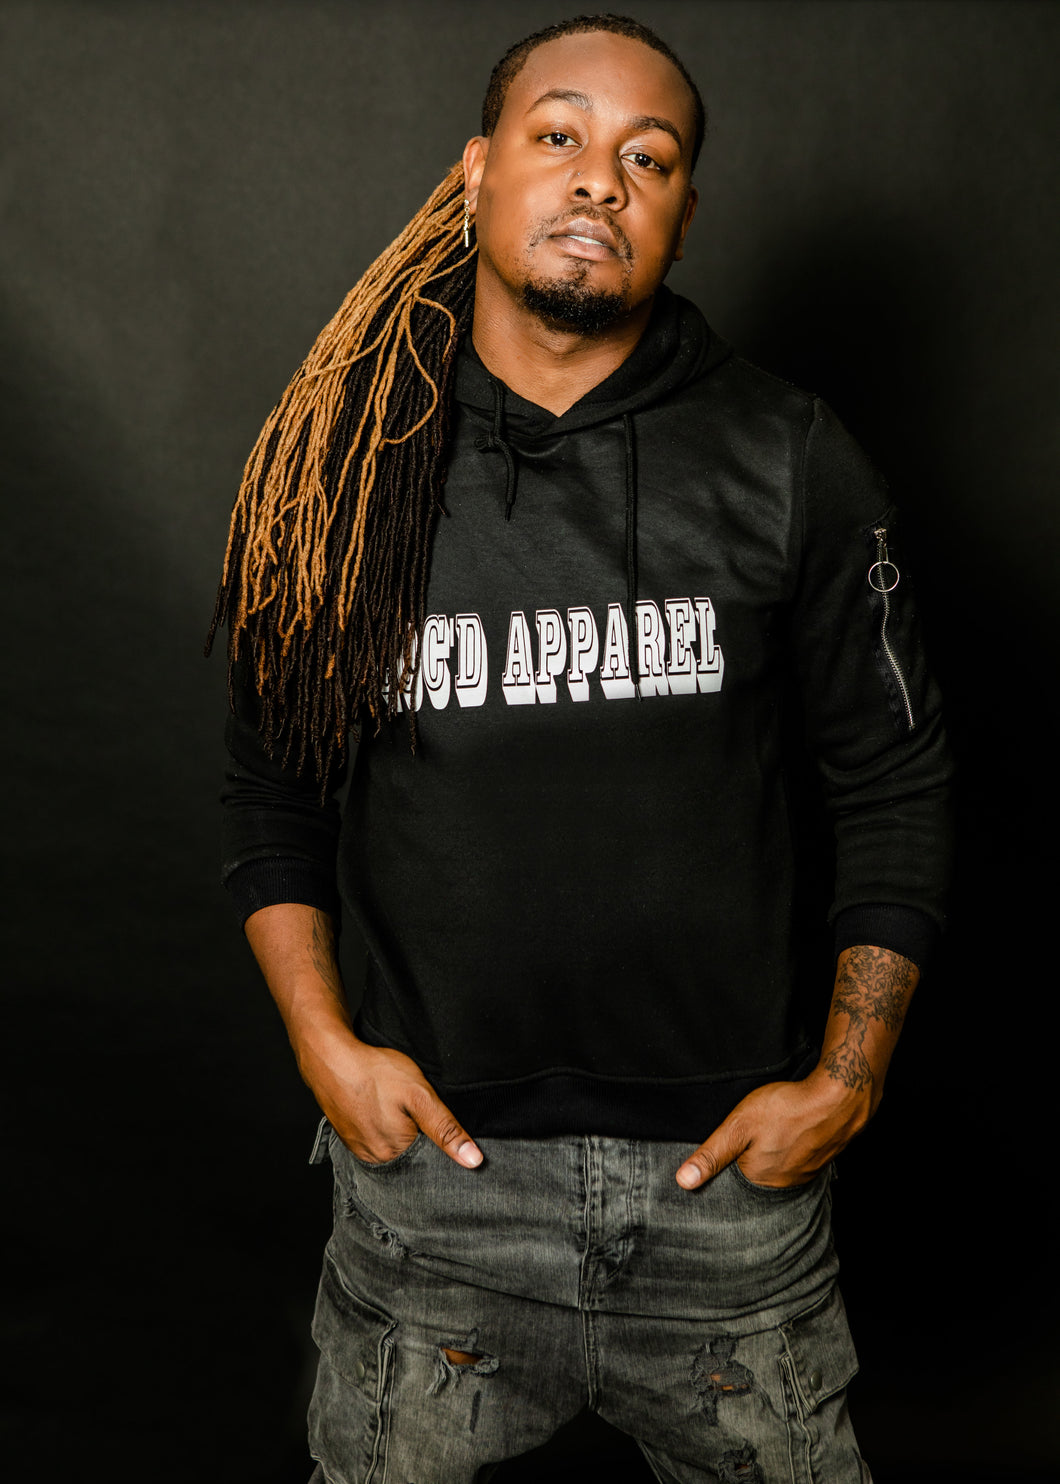 Black and White Loc'd Apparel Hoodie